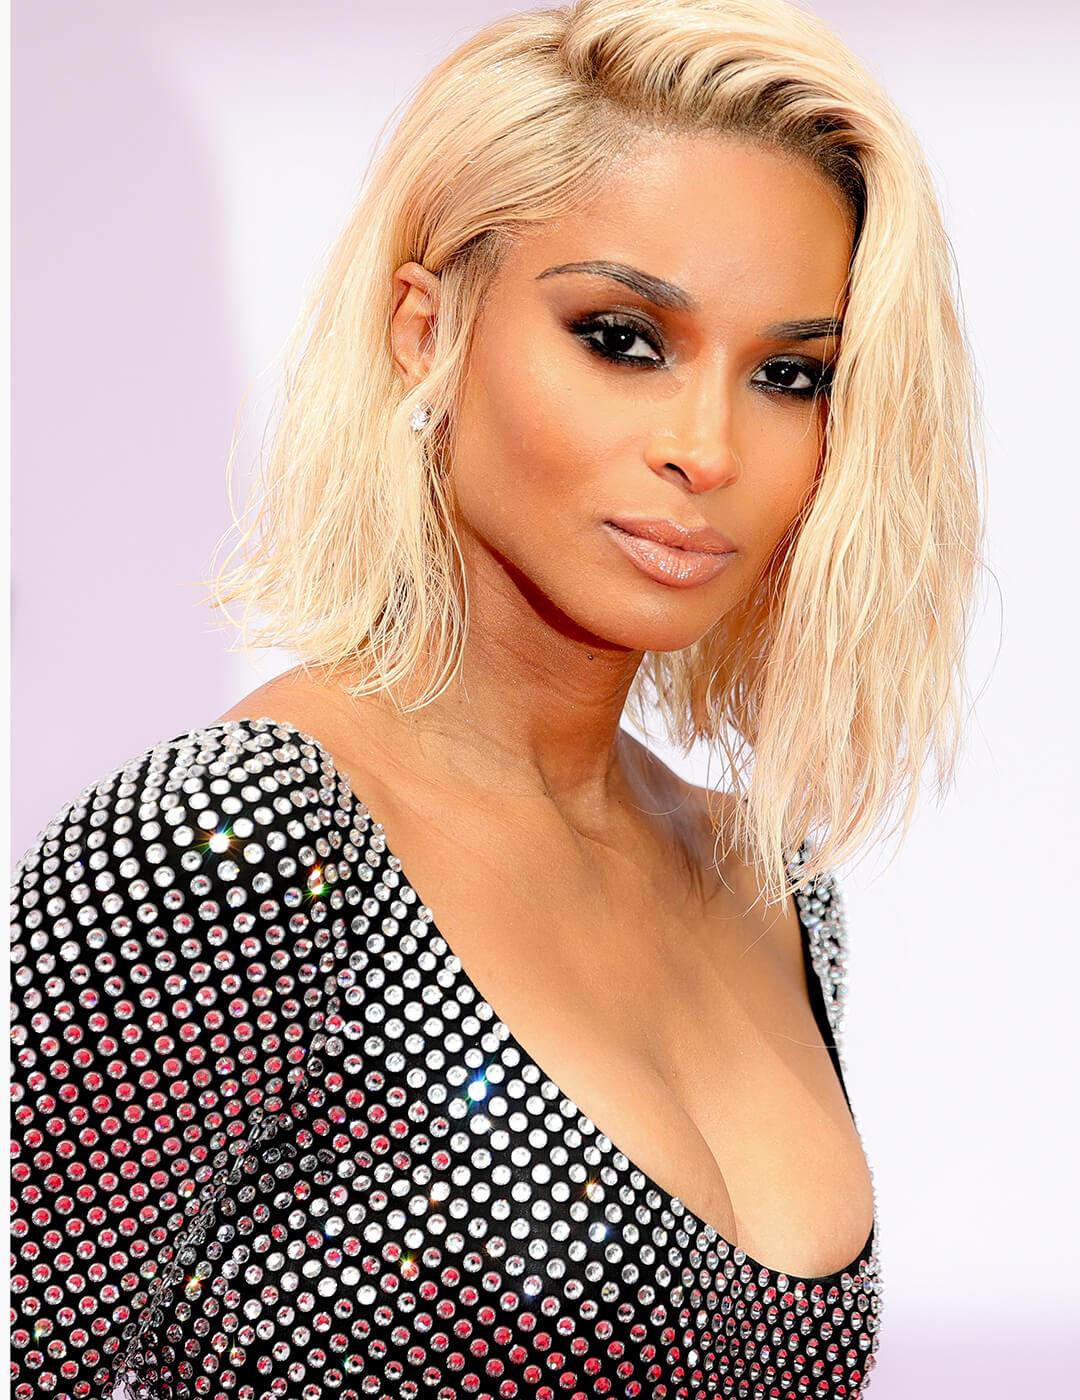 A photo of Ciara wearing a dazzling low cut dress in her mid-length blond hair tucked in her ear